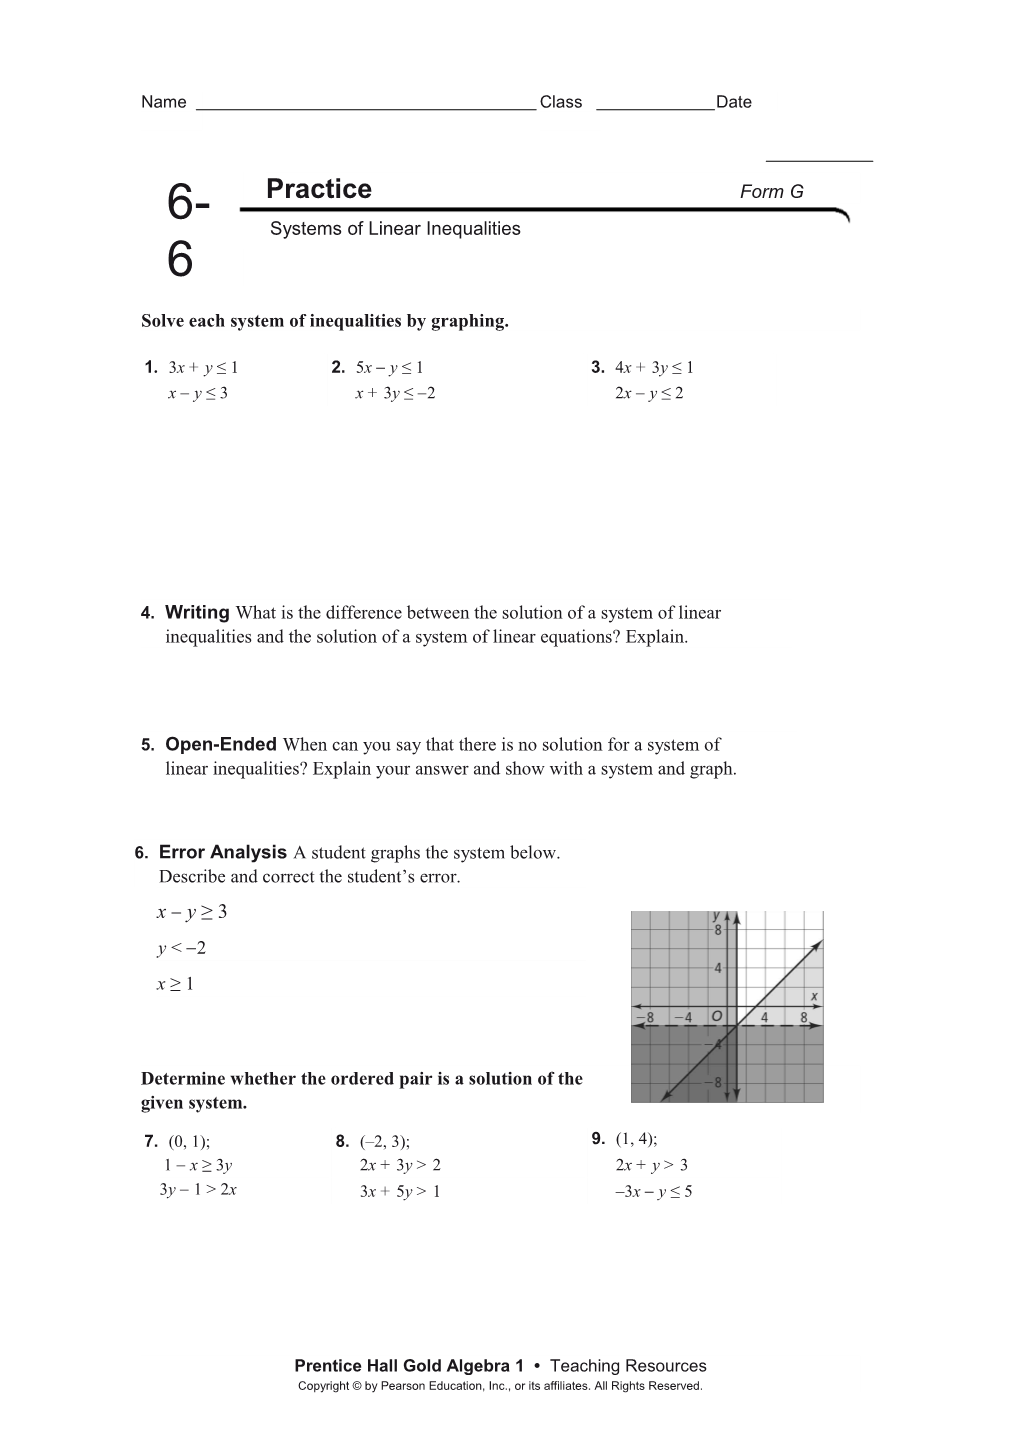 Solve Each System of Inequalities by Graphing